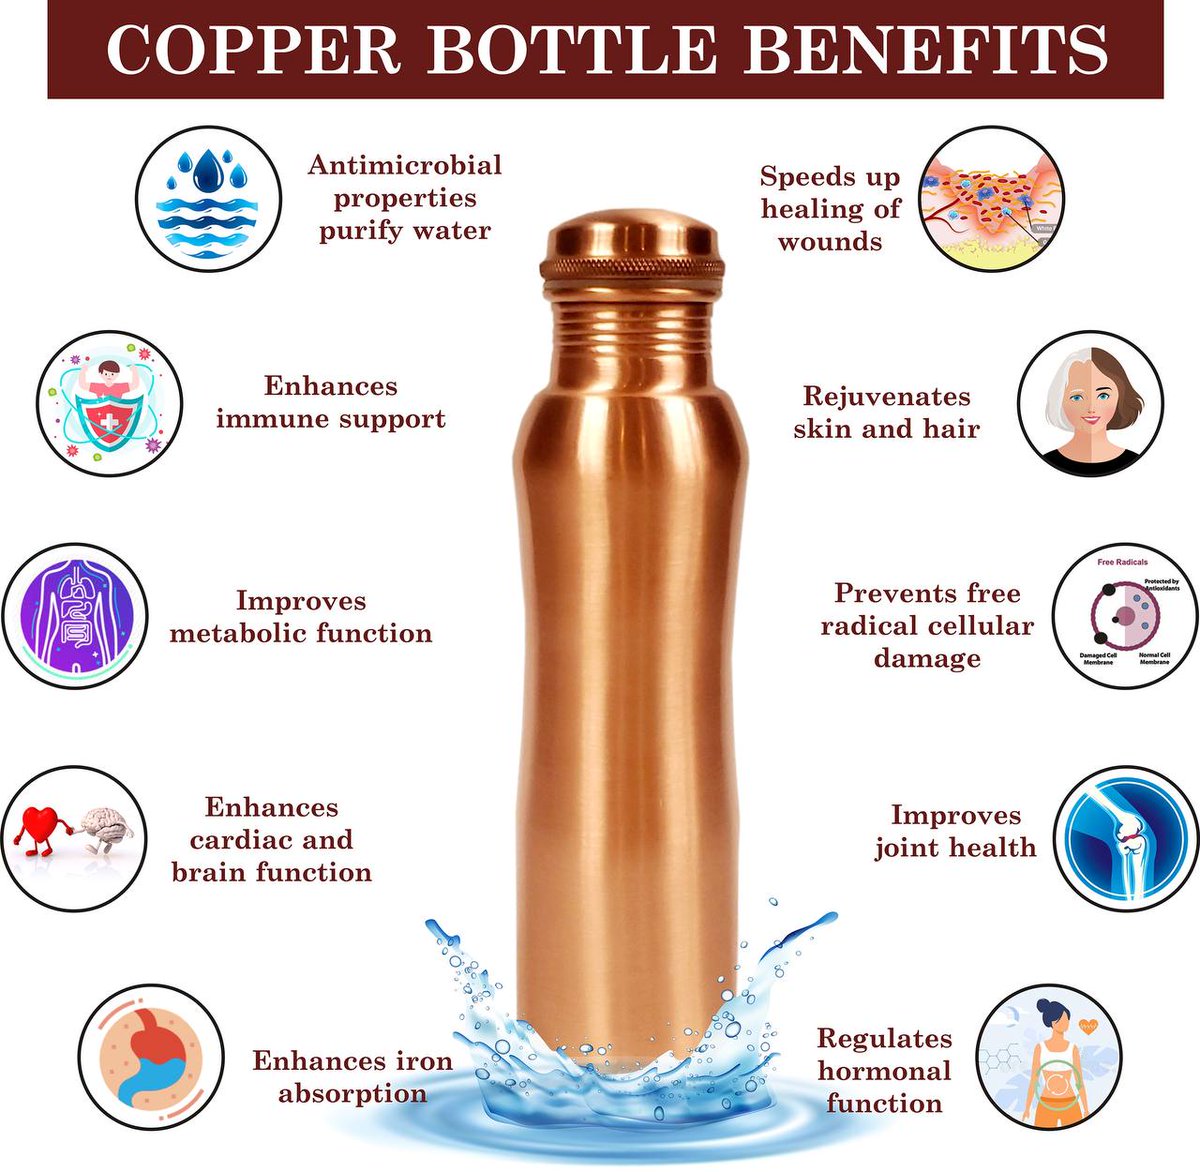 ✨Drinking From a Copper Vessel✨

Health benefits of storing water in and drinking from copper vessels

~ Sterilizes the water
~ Destroys bacteria in the water
~ Helps cleanse and detox your body
~ Helps regulates liver and kidney functions 
~ Helps your body absorb nutrients
~…